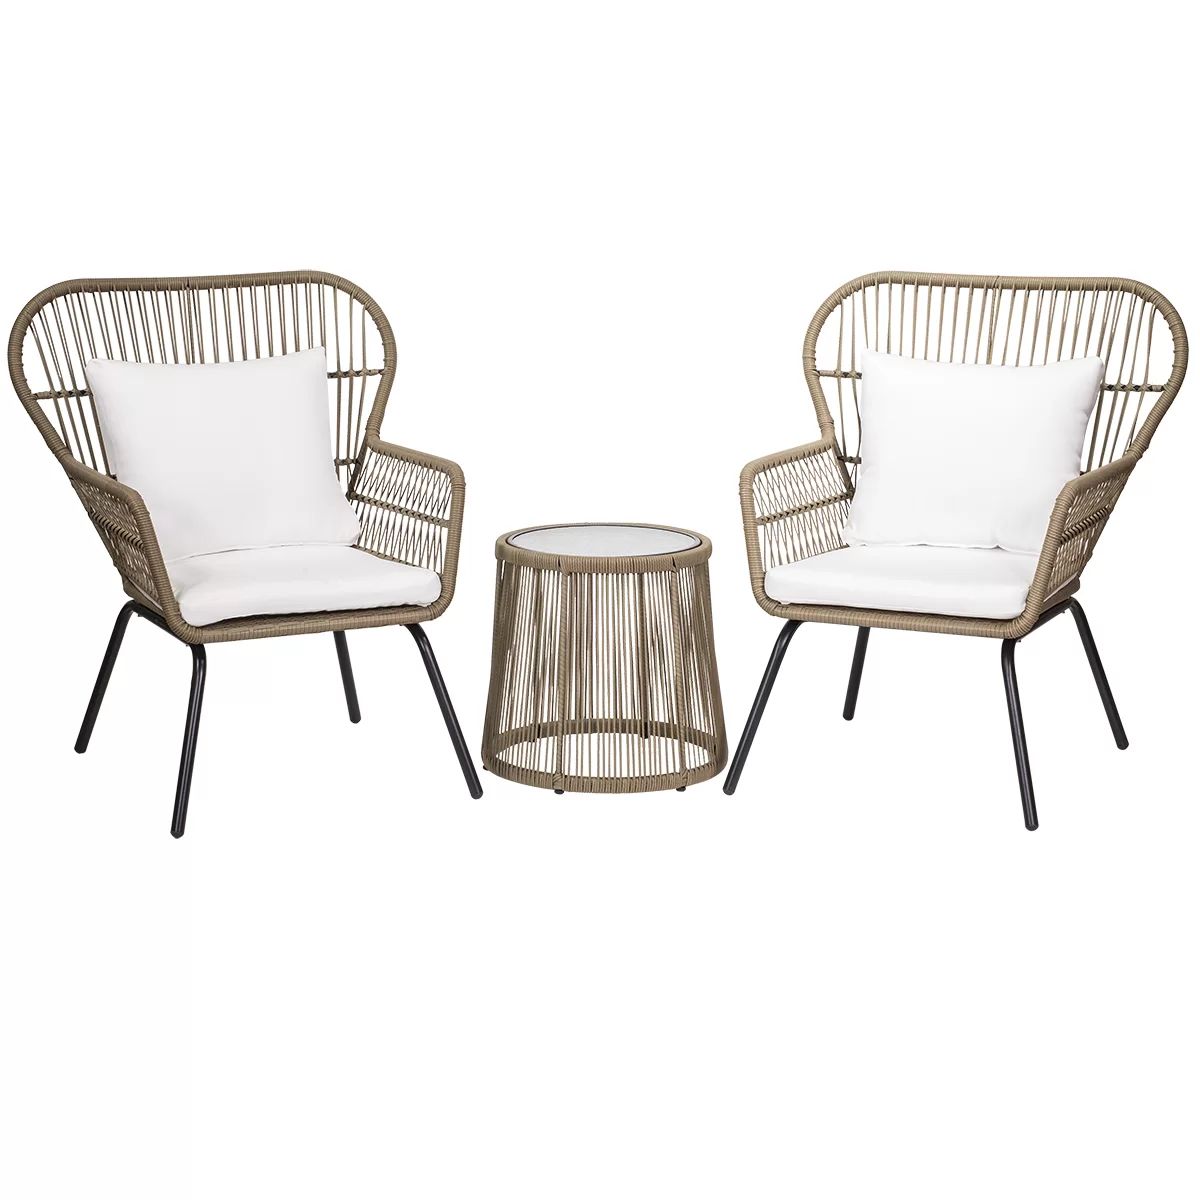 Alysa Wicker/Rattan 2 - Person Seating Group with Cushions | Wayfair North America